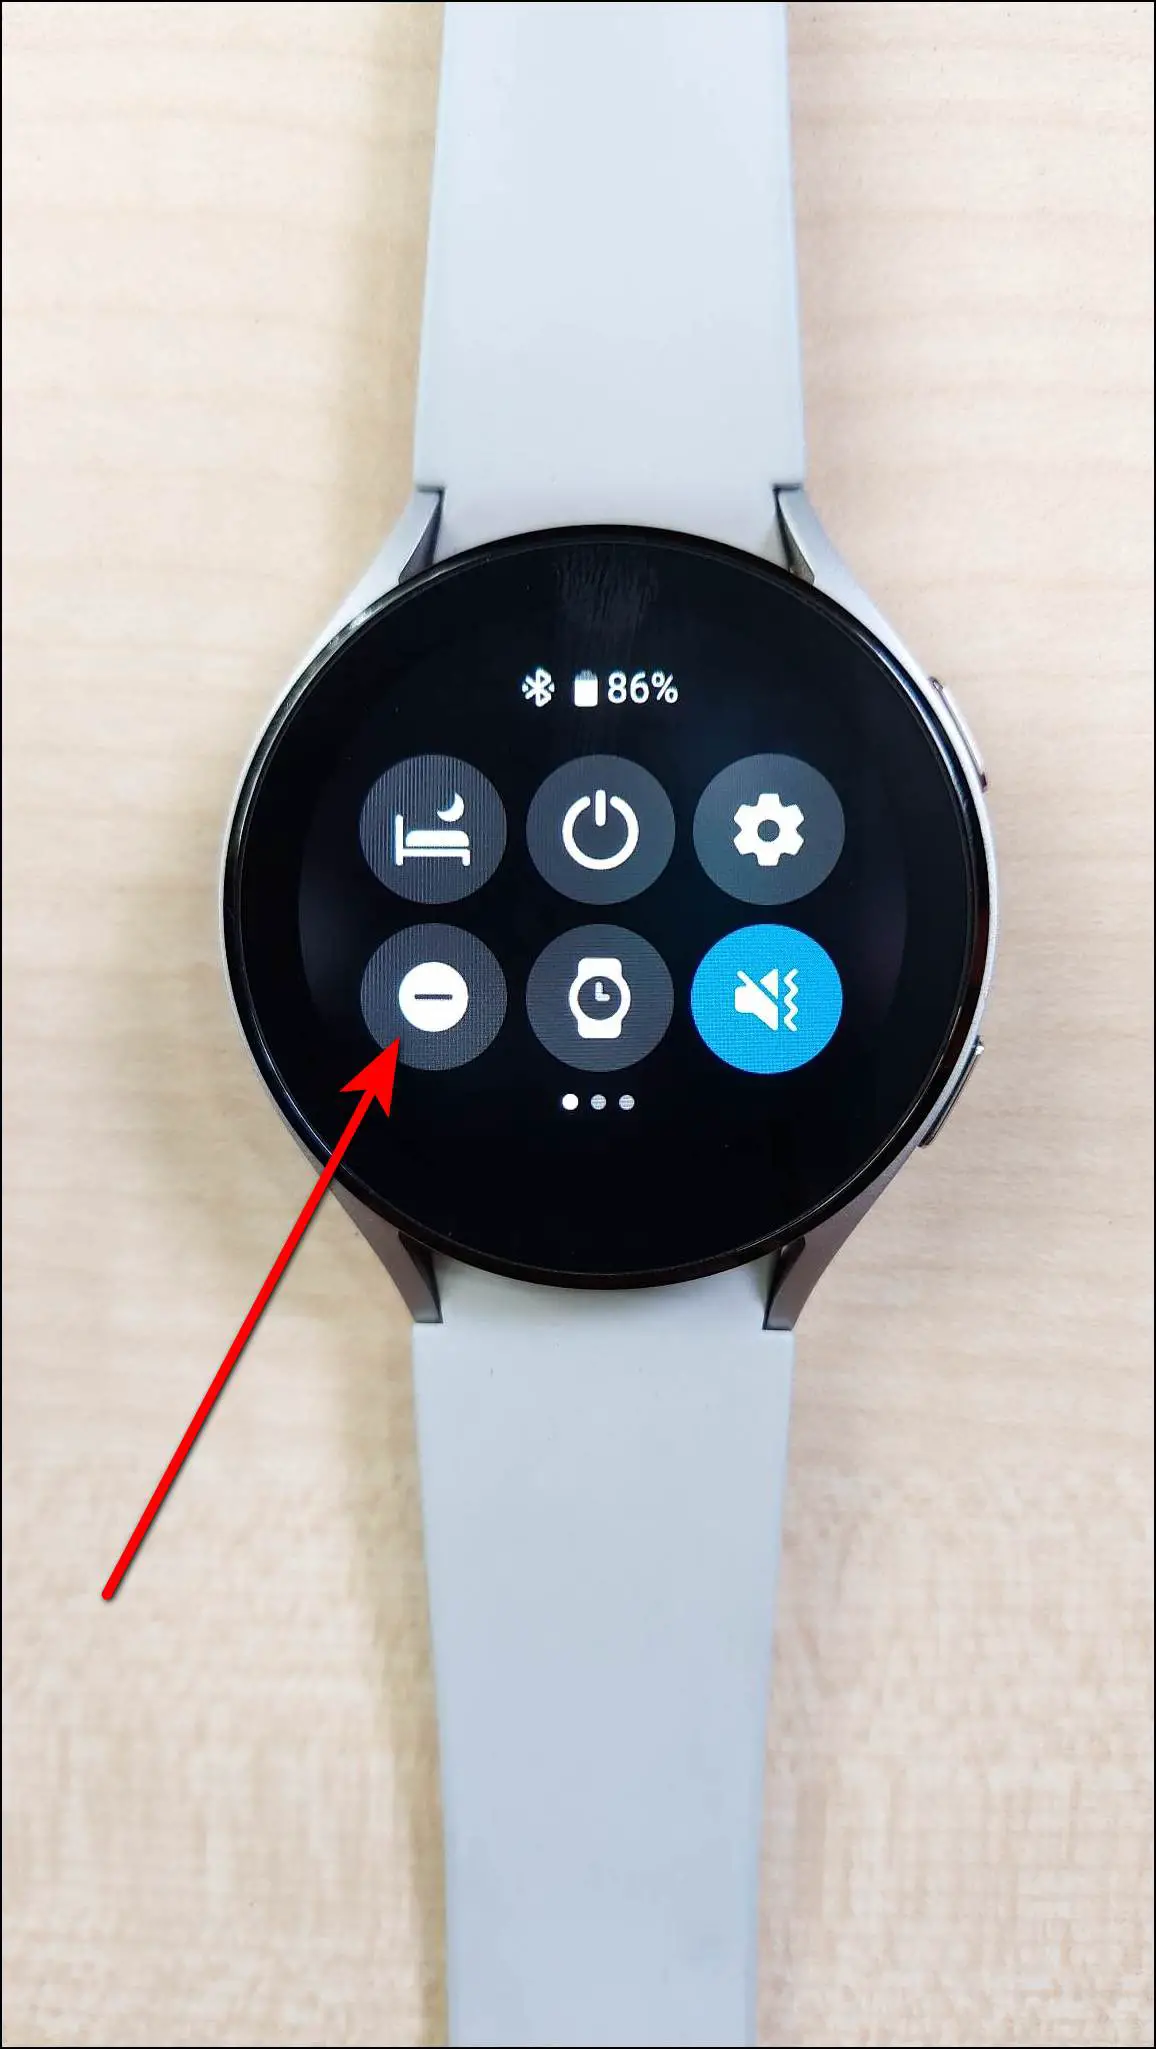 Enable DND on Galaxy Watch 4